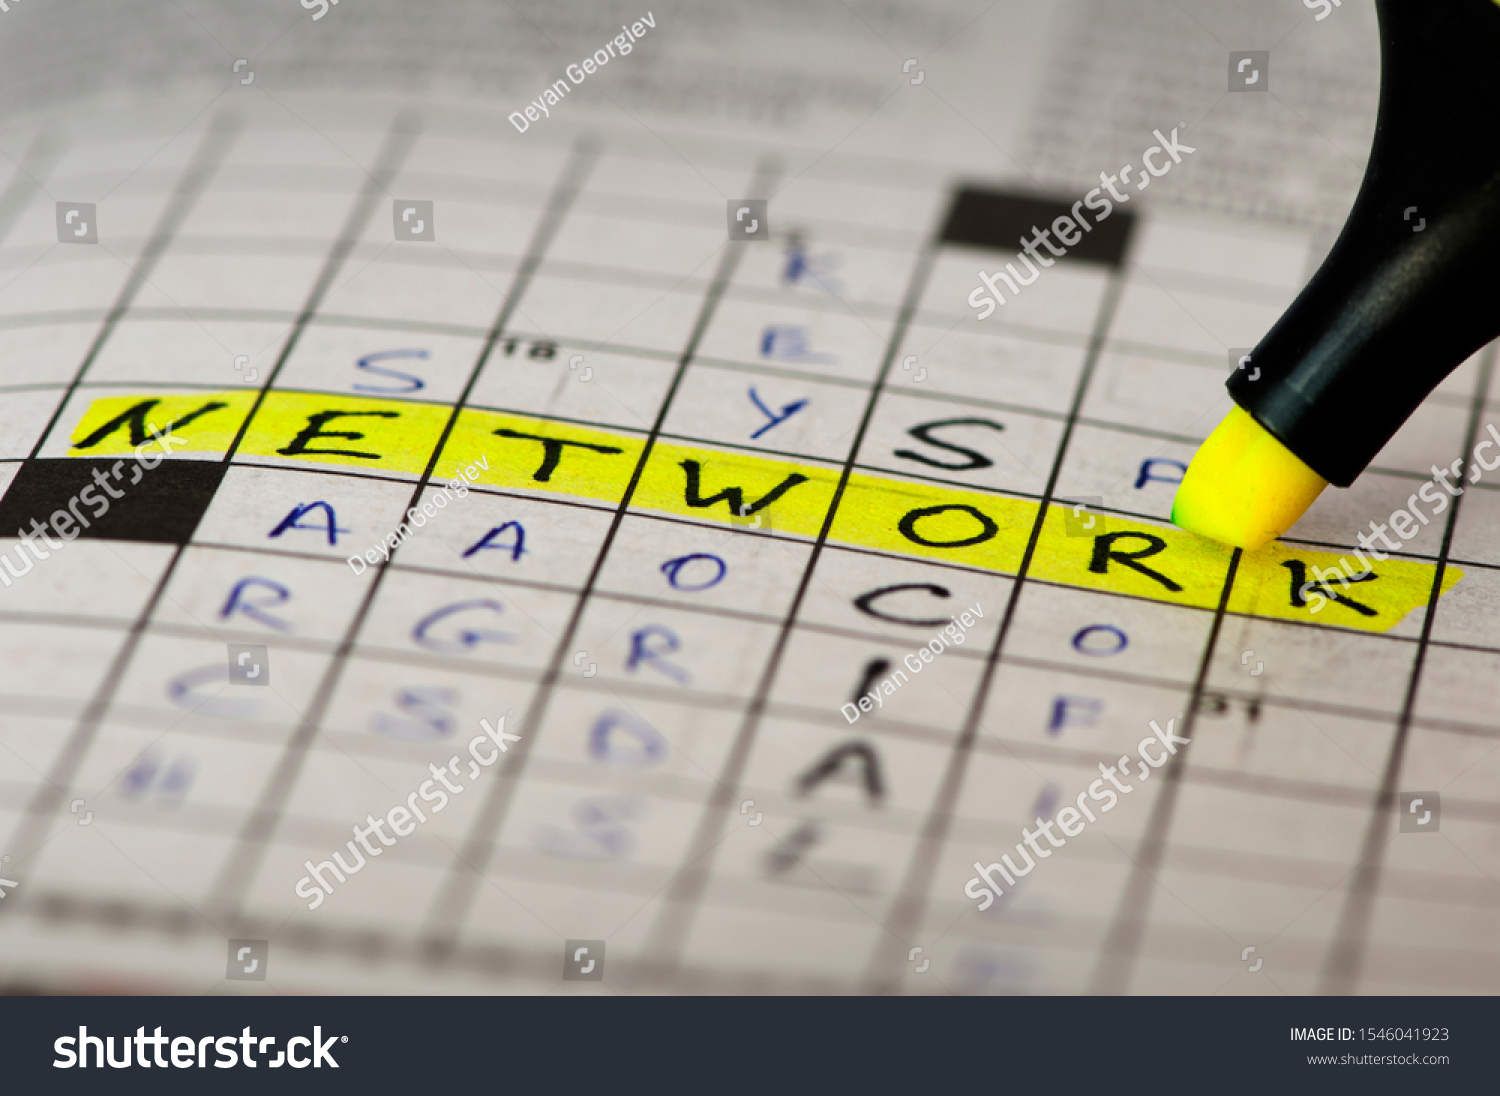 Social Network Conception Text Crossword Puzzle Stock Photo 1546041923